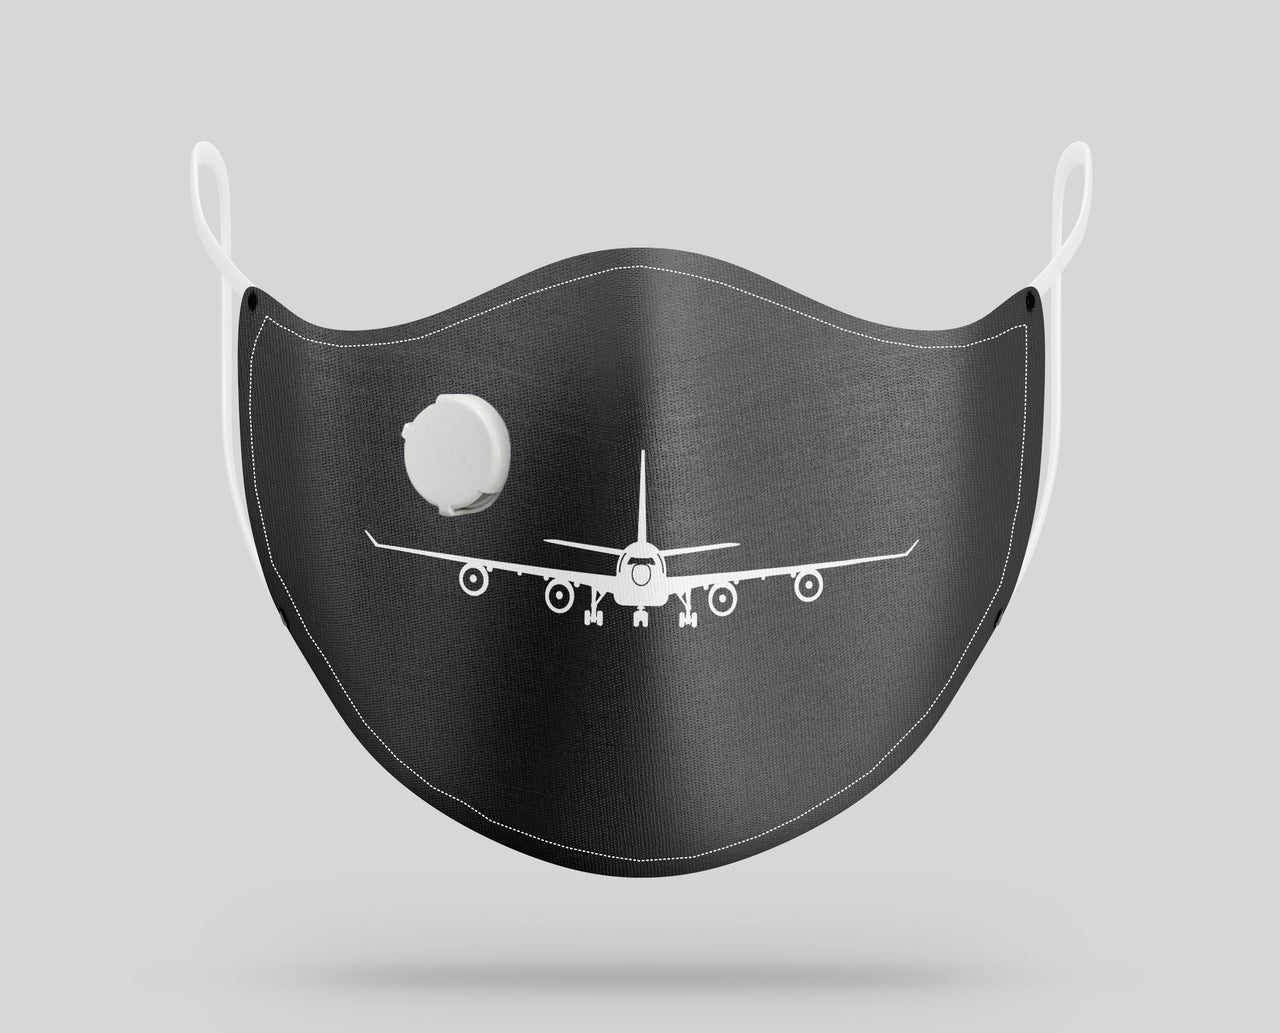 Airbus A340 Silhouette Designed Face Masks